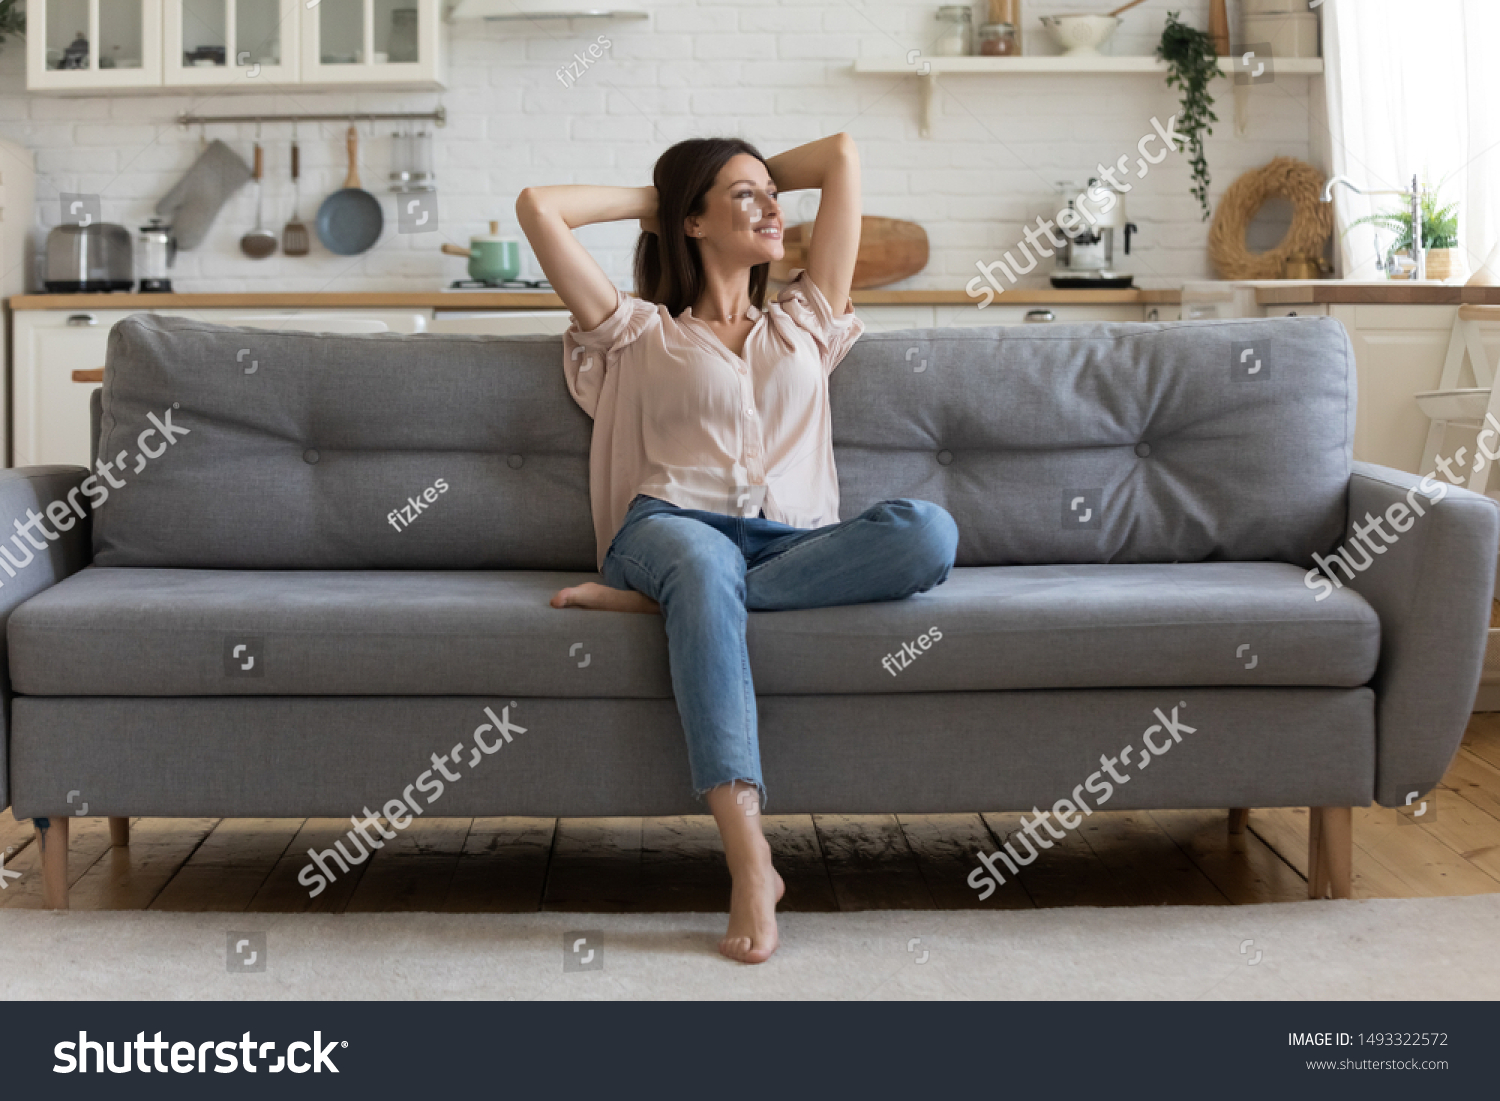 In cozy living room happy woman put hands behind head sitting leaned on couch 30s european female enjoy lazy weekend or vacation, housewife relaxing feels satisfied accomplish chores housework concept #1493322572